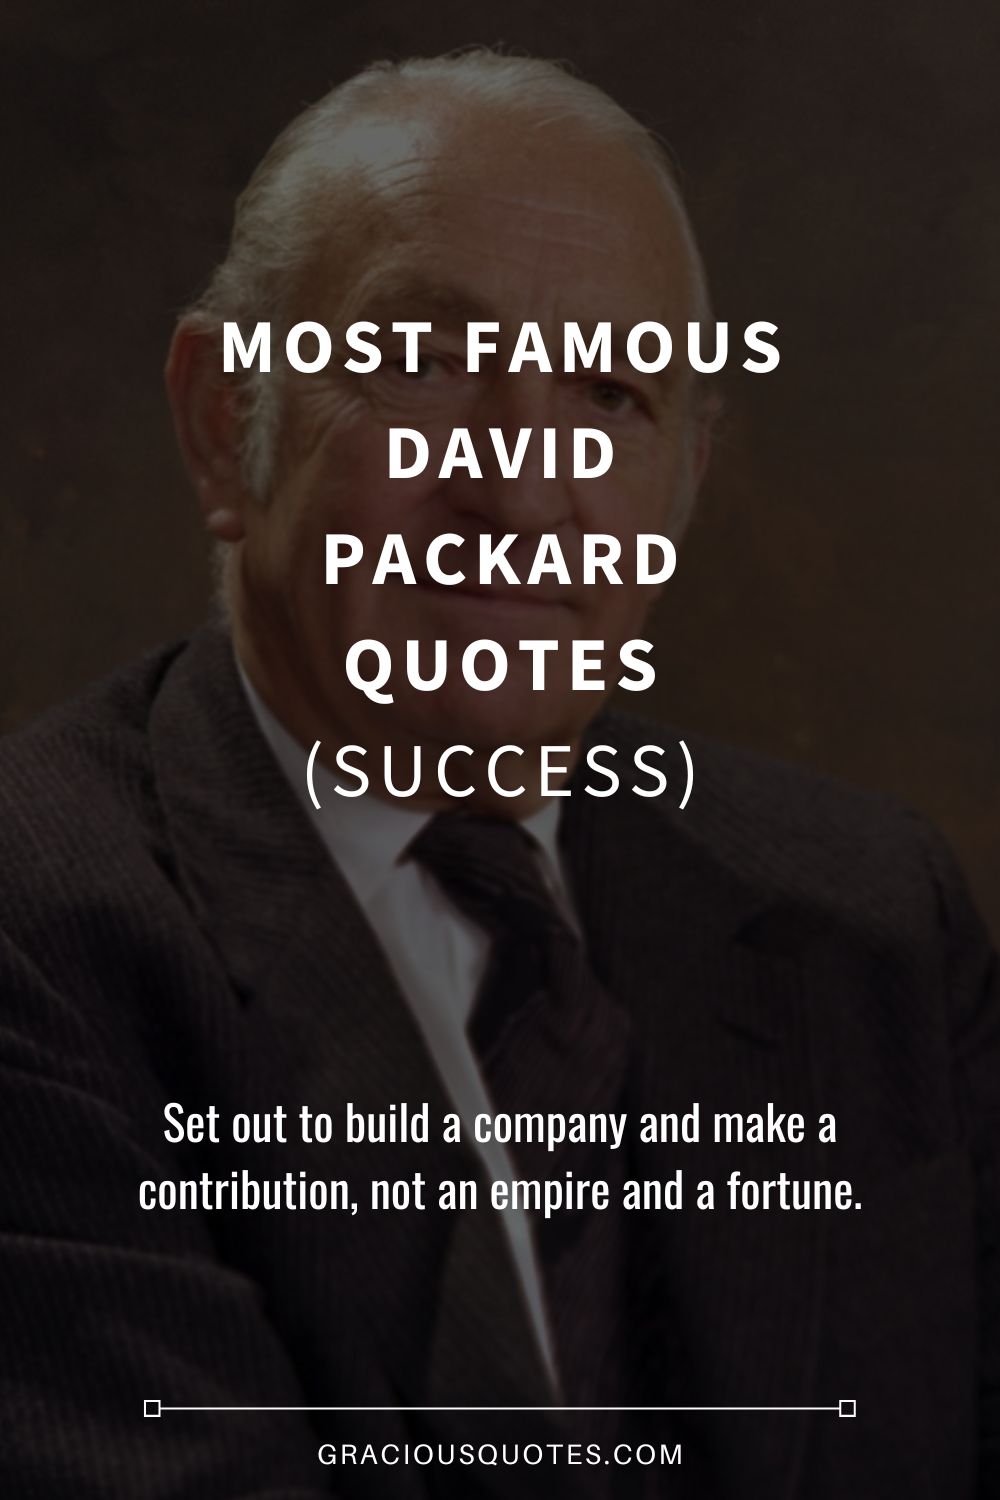 Most Famous David Packard Quotes (SUCCESS) - Gracious Quotes